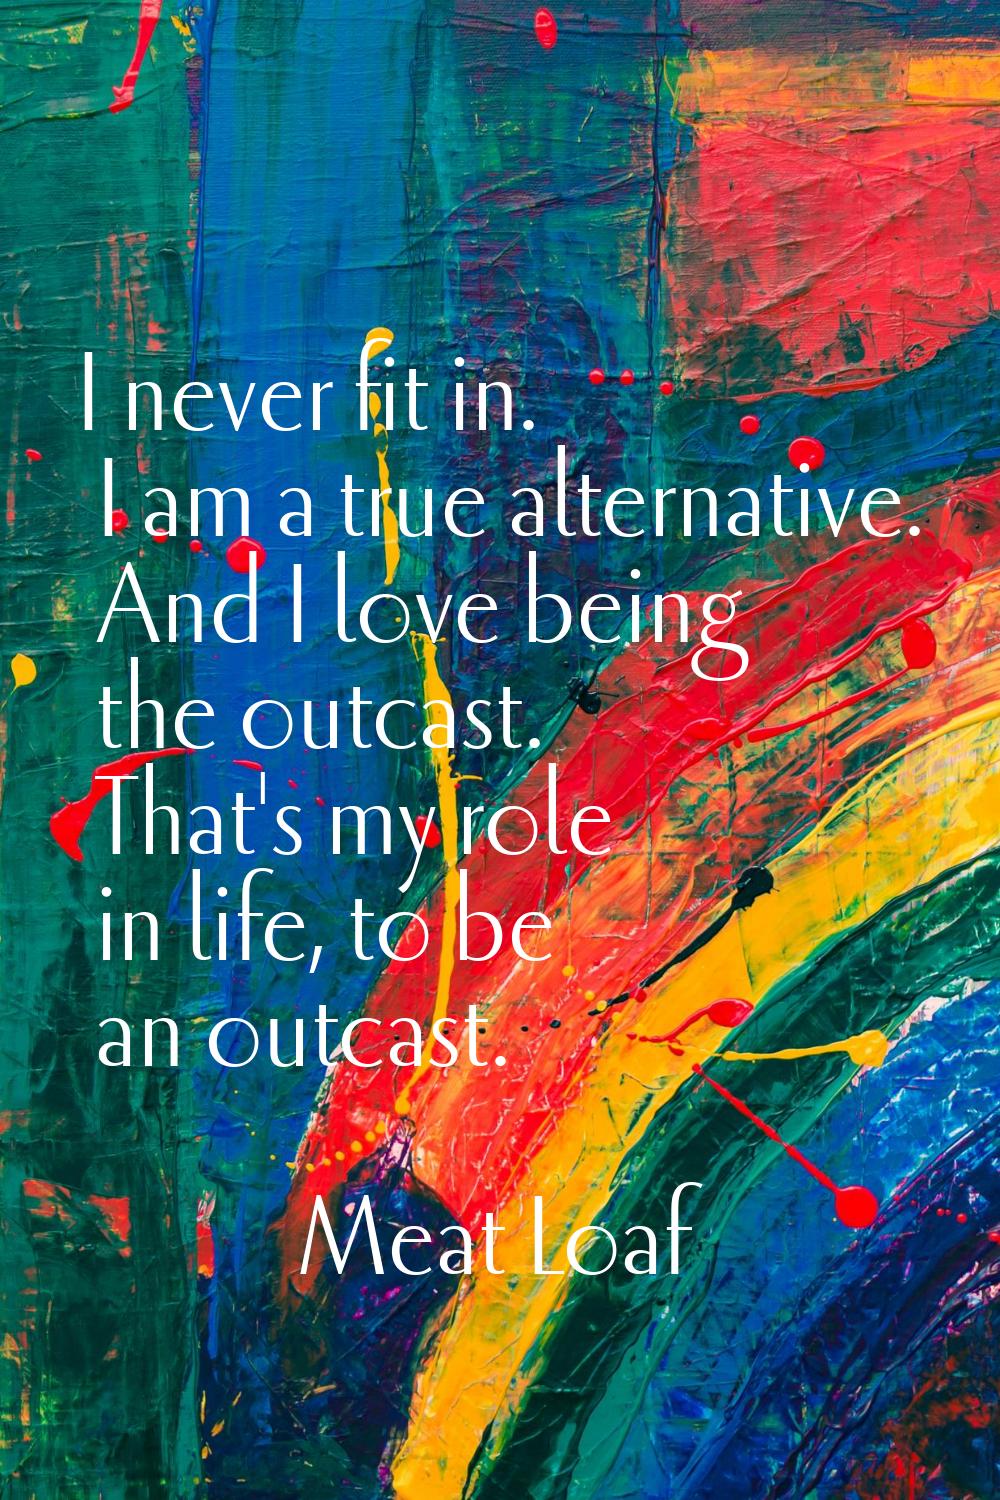 I never fit in. I am a true alternative. And I love being the outcast. That's my role in life, to b